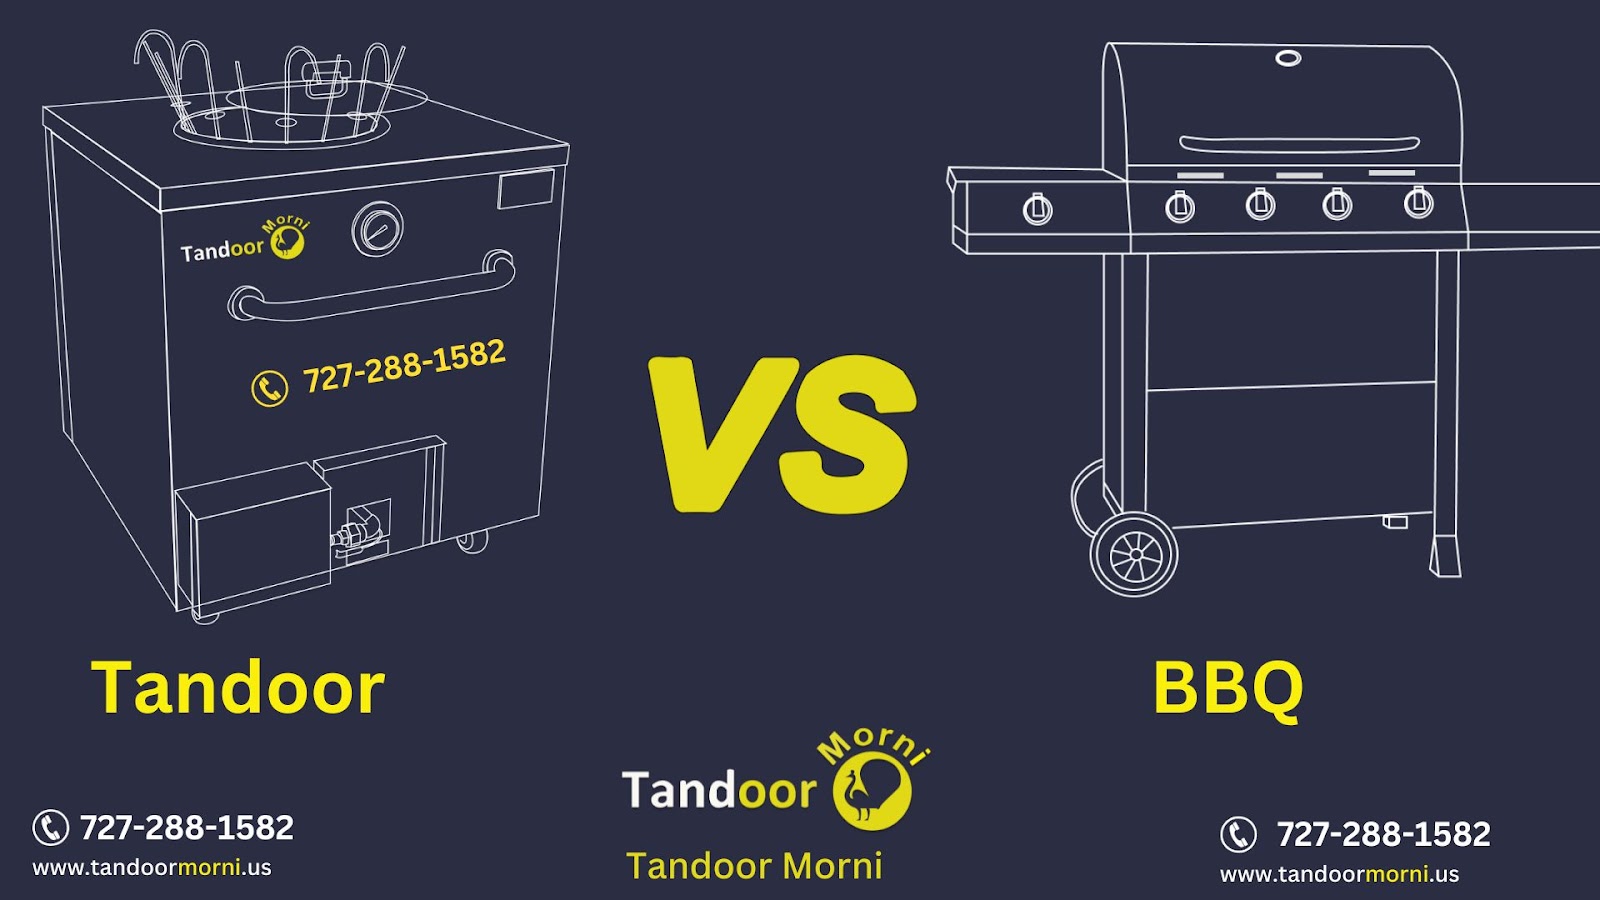 This graphic depicts bbq vs tandoor, with bbq tandoori food tasting better in a tandoor oven.